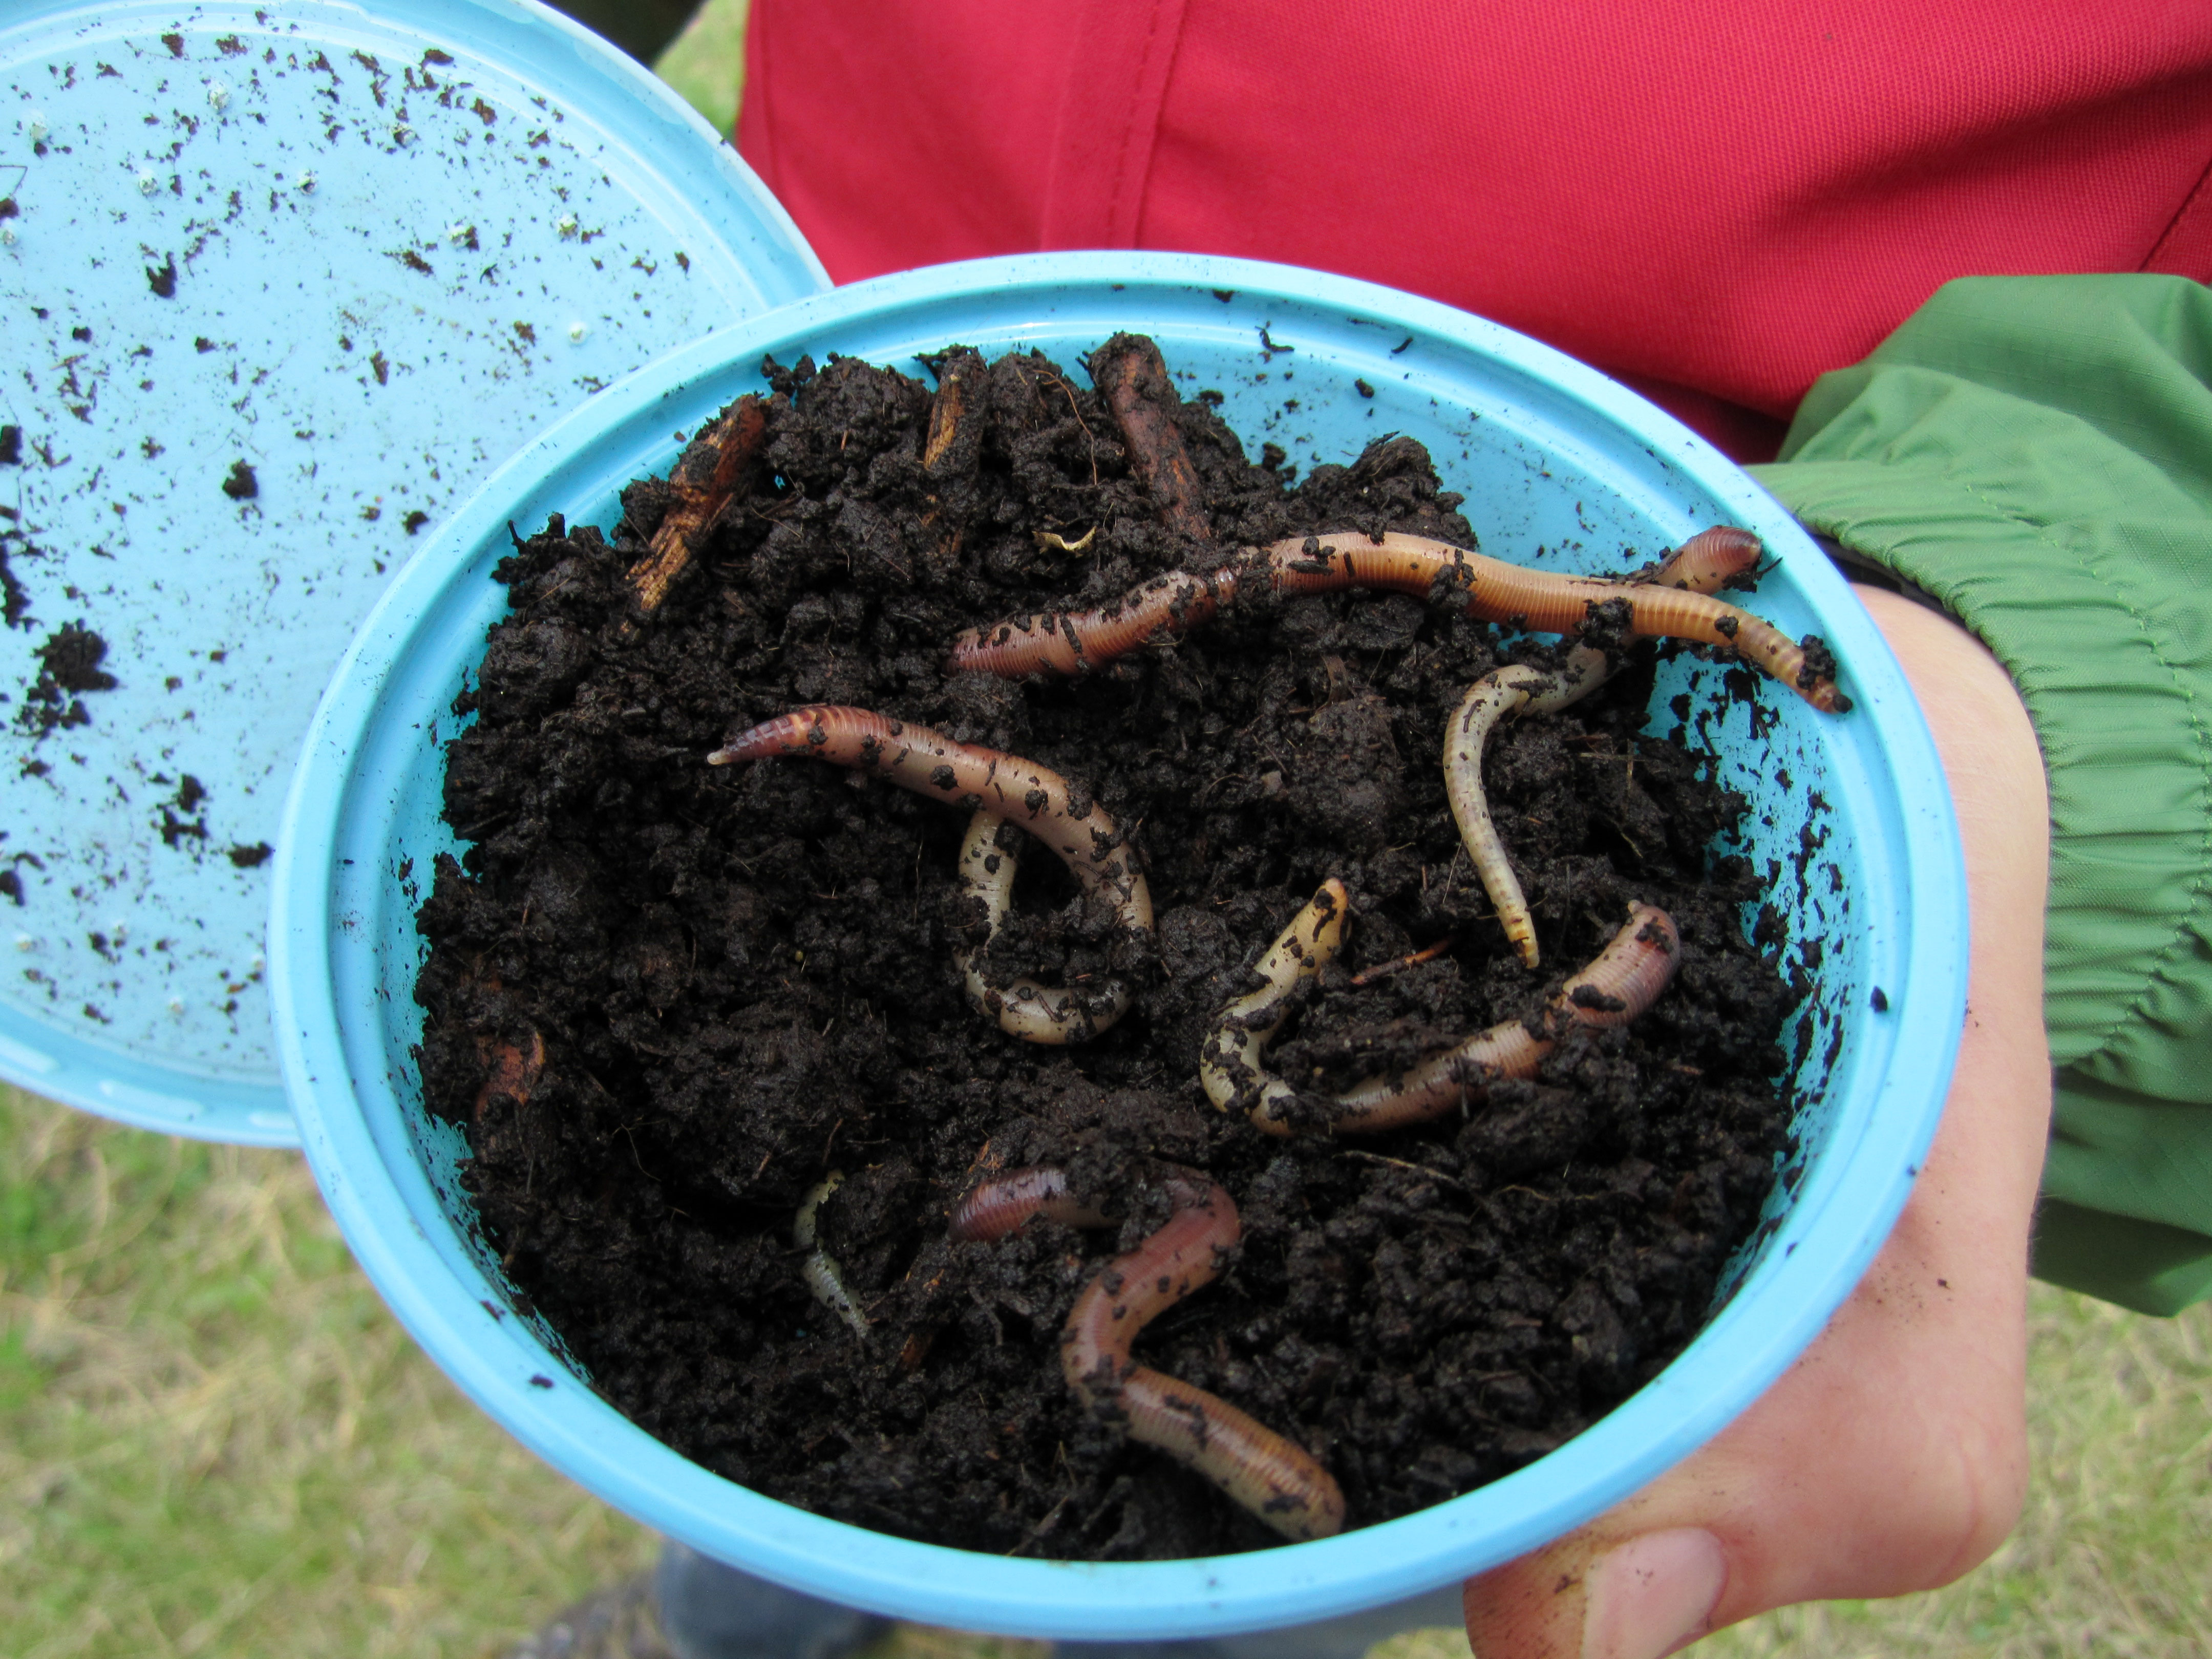 Red Wiggler - LIVE Earthworms - Trout, Fish Bait & Reptile Food Diet,  Composting